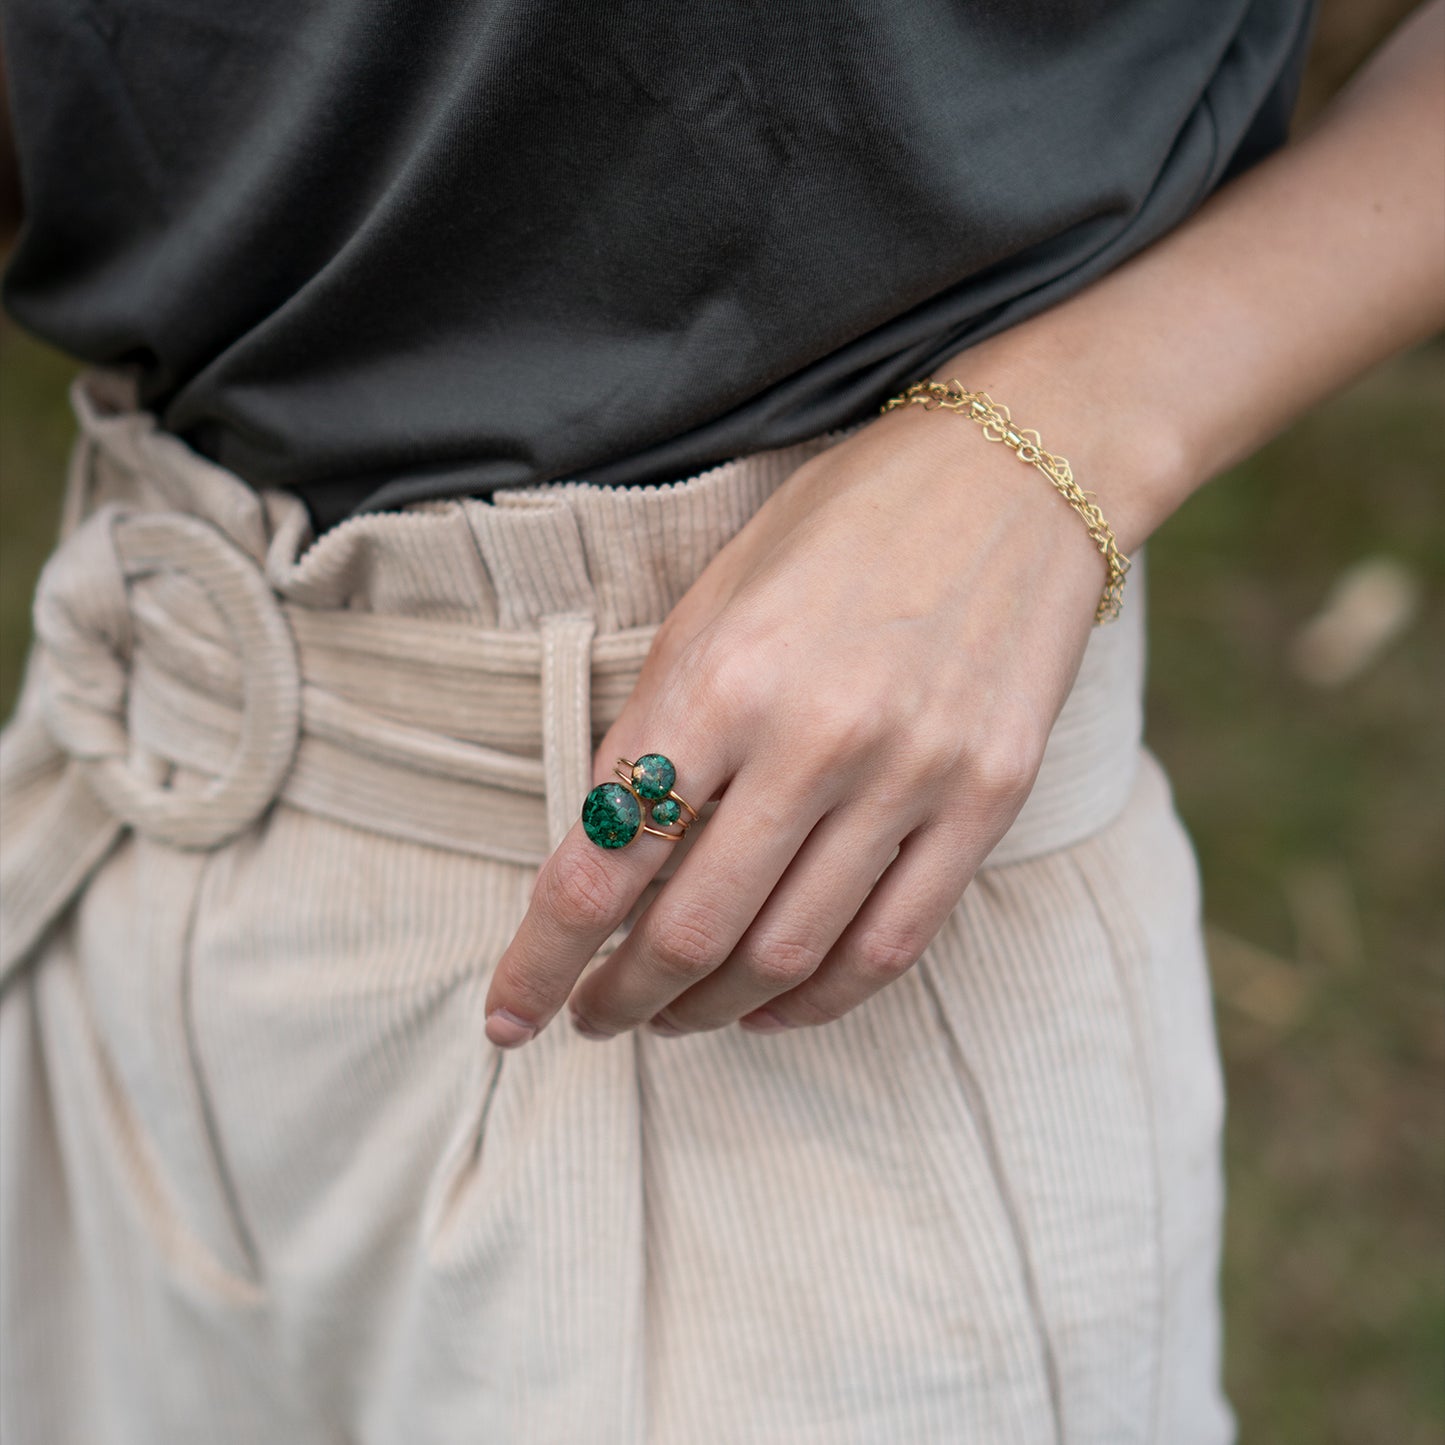 Bright Green ring has crushed Malachite stone pieces captured in glass like resin in a 12mm round shape. Bright natural green ring is a perfect compliment to your everyday style. Beautiful by itself or in a stack. 